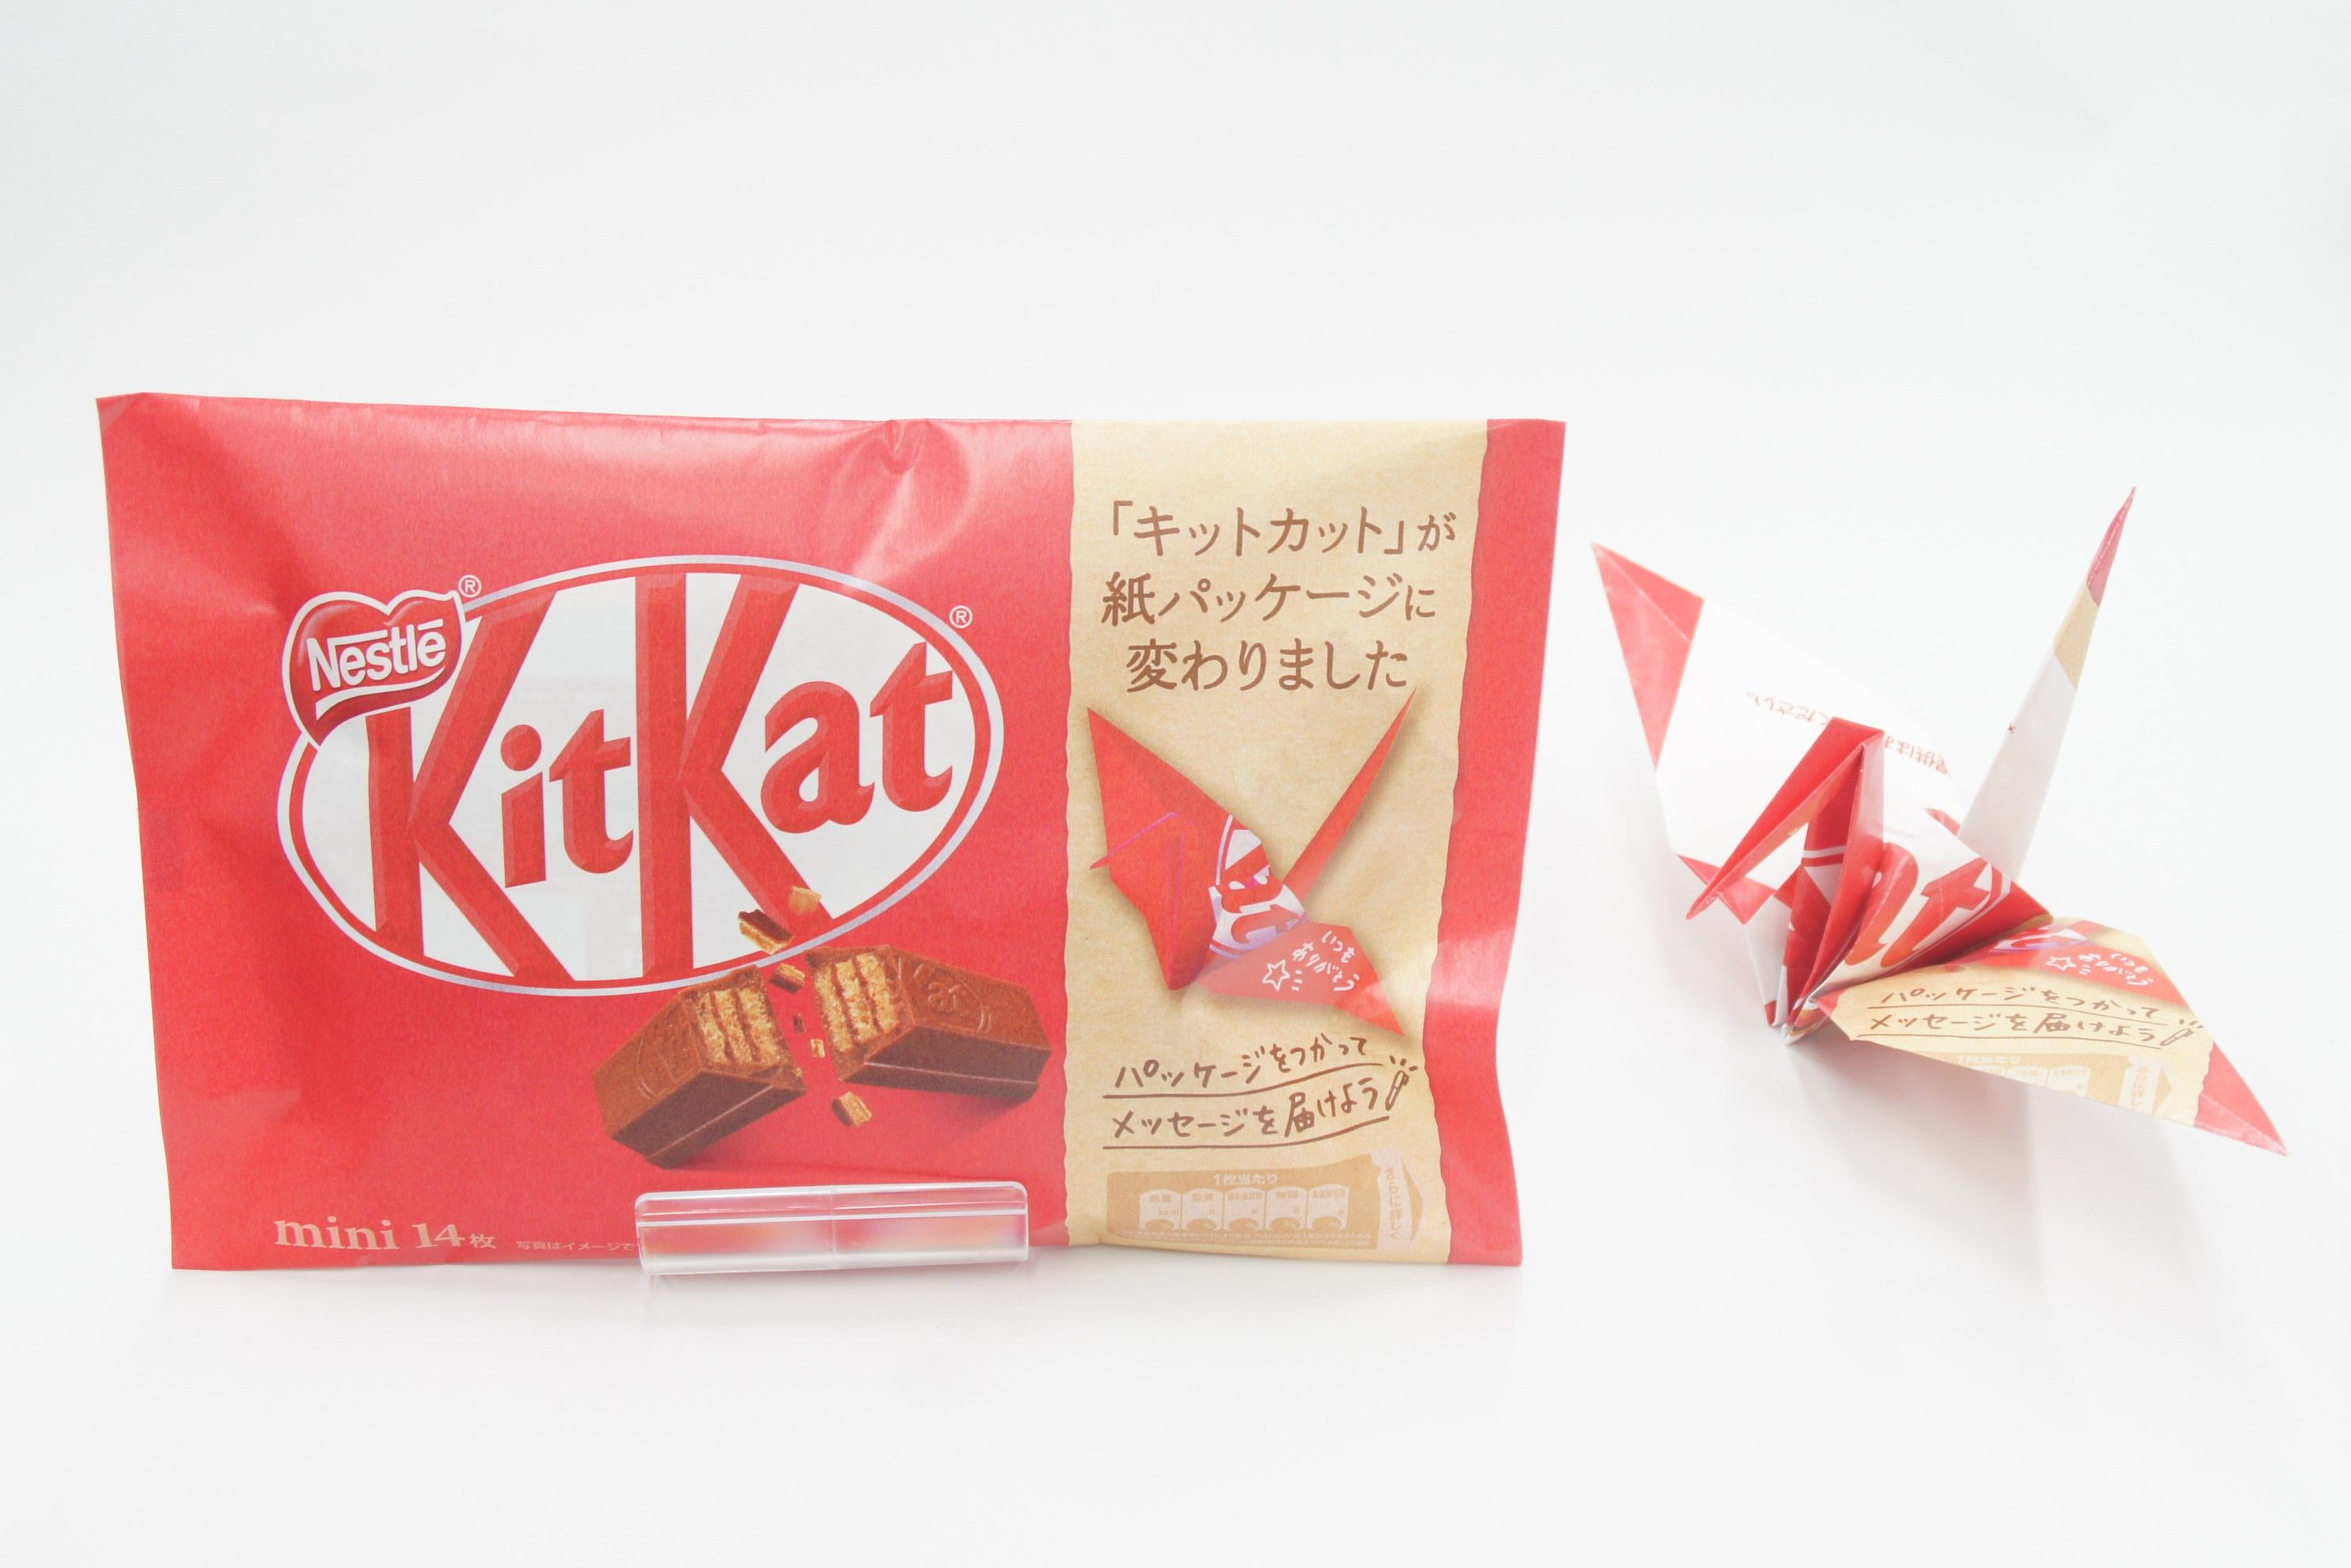 Cheap Origami Paper Nestl Japan Is Selling Kitkats Wrapped In Origami Paper